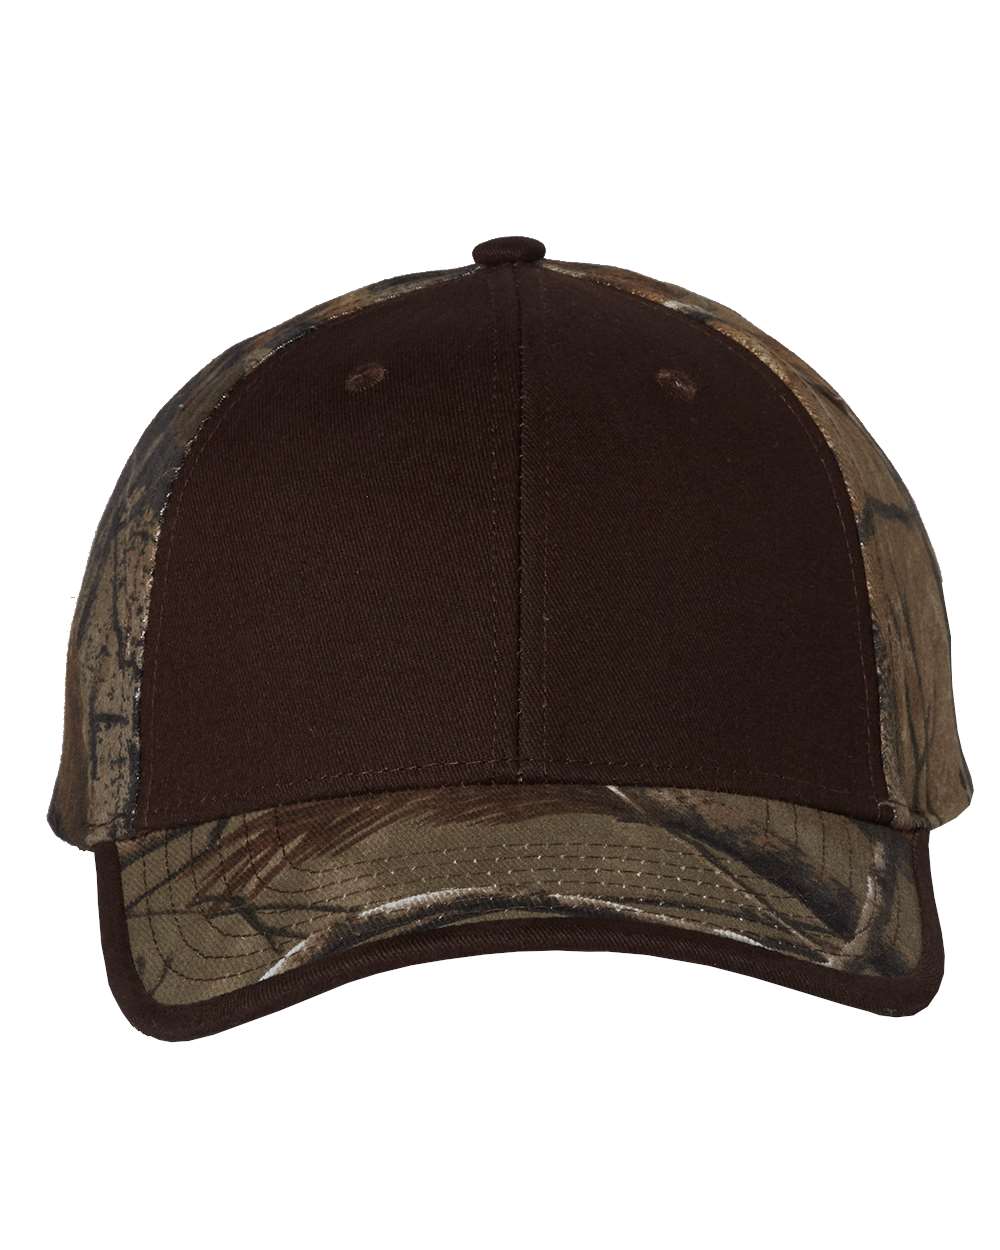 A cap with a solid brown front and a camo back in Realtree AP pattern.